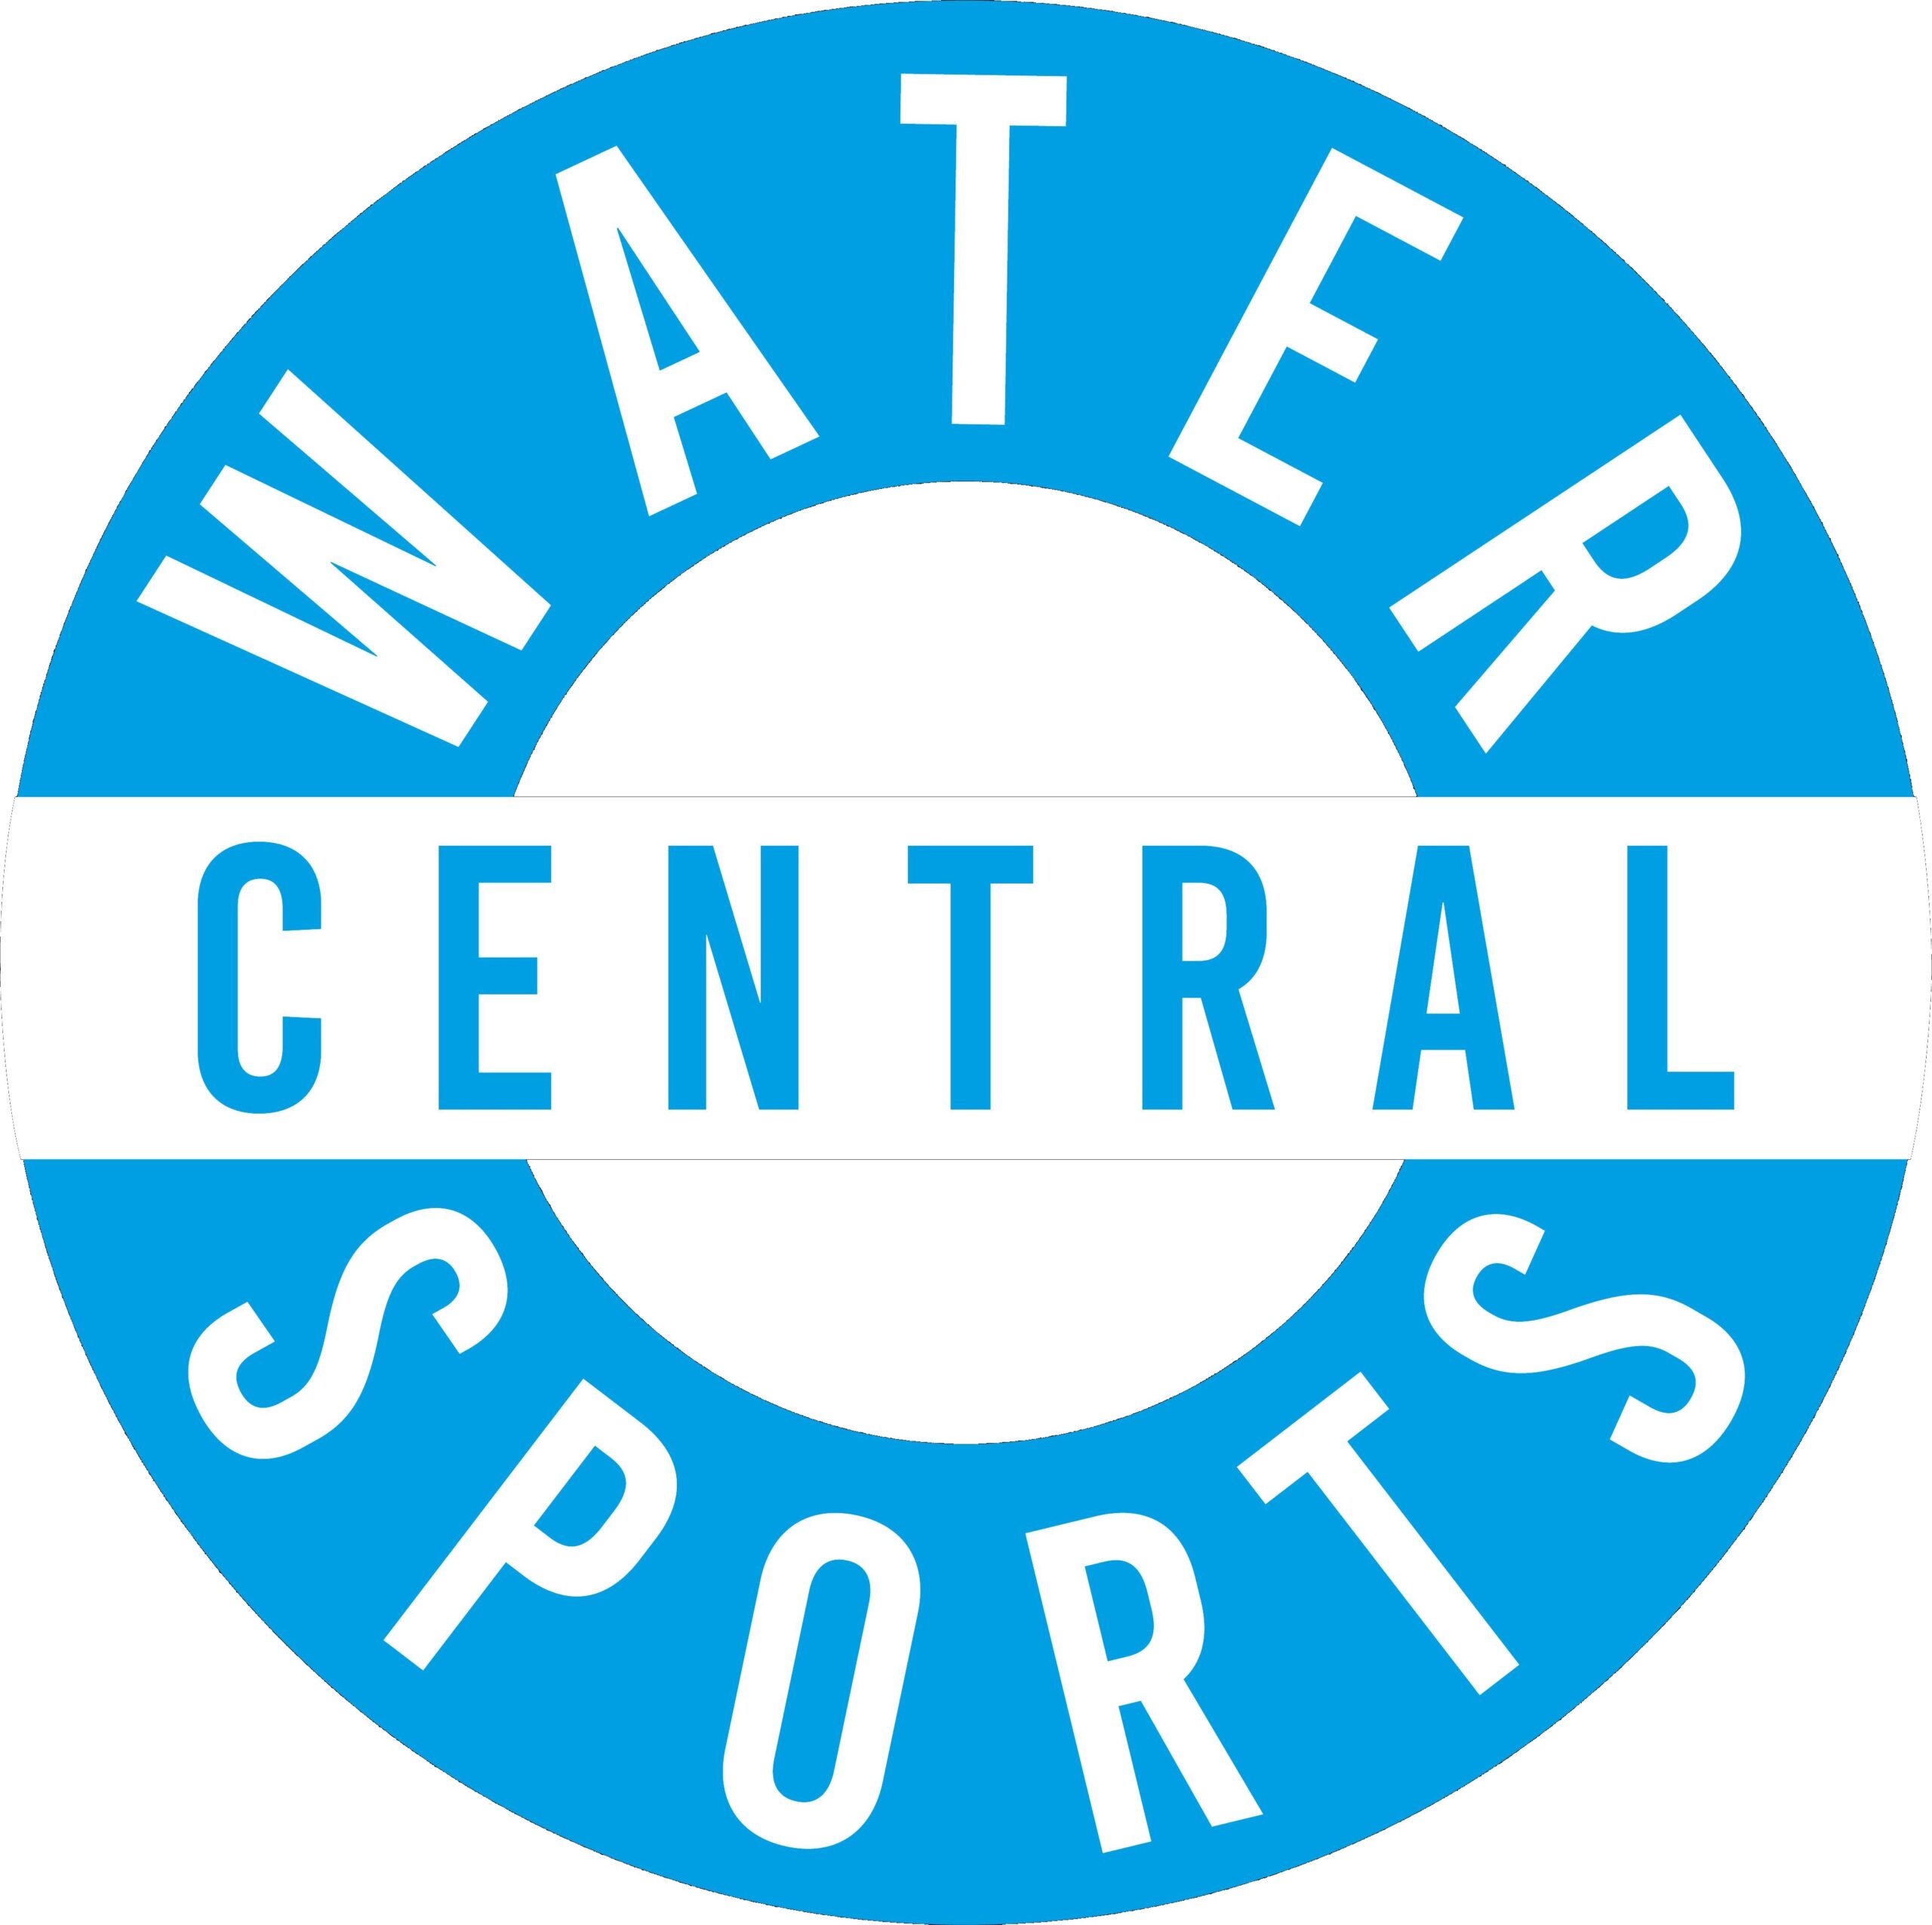 Water sports central logo